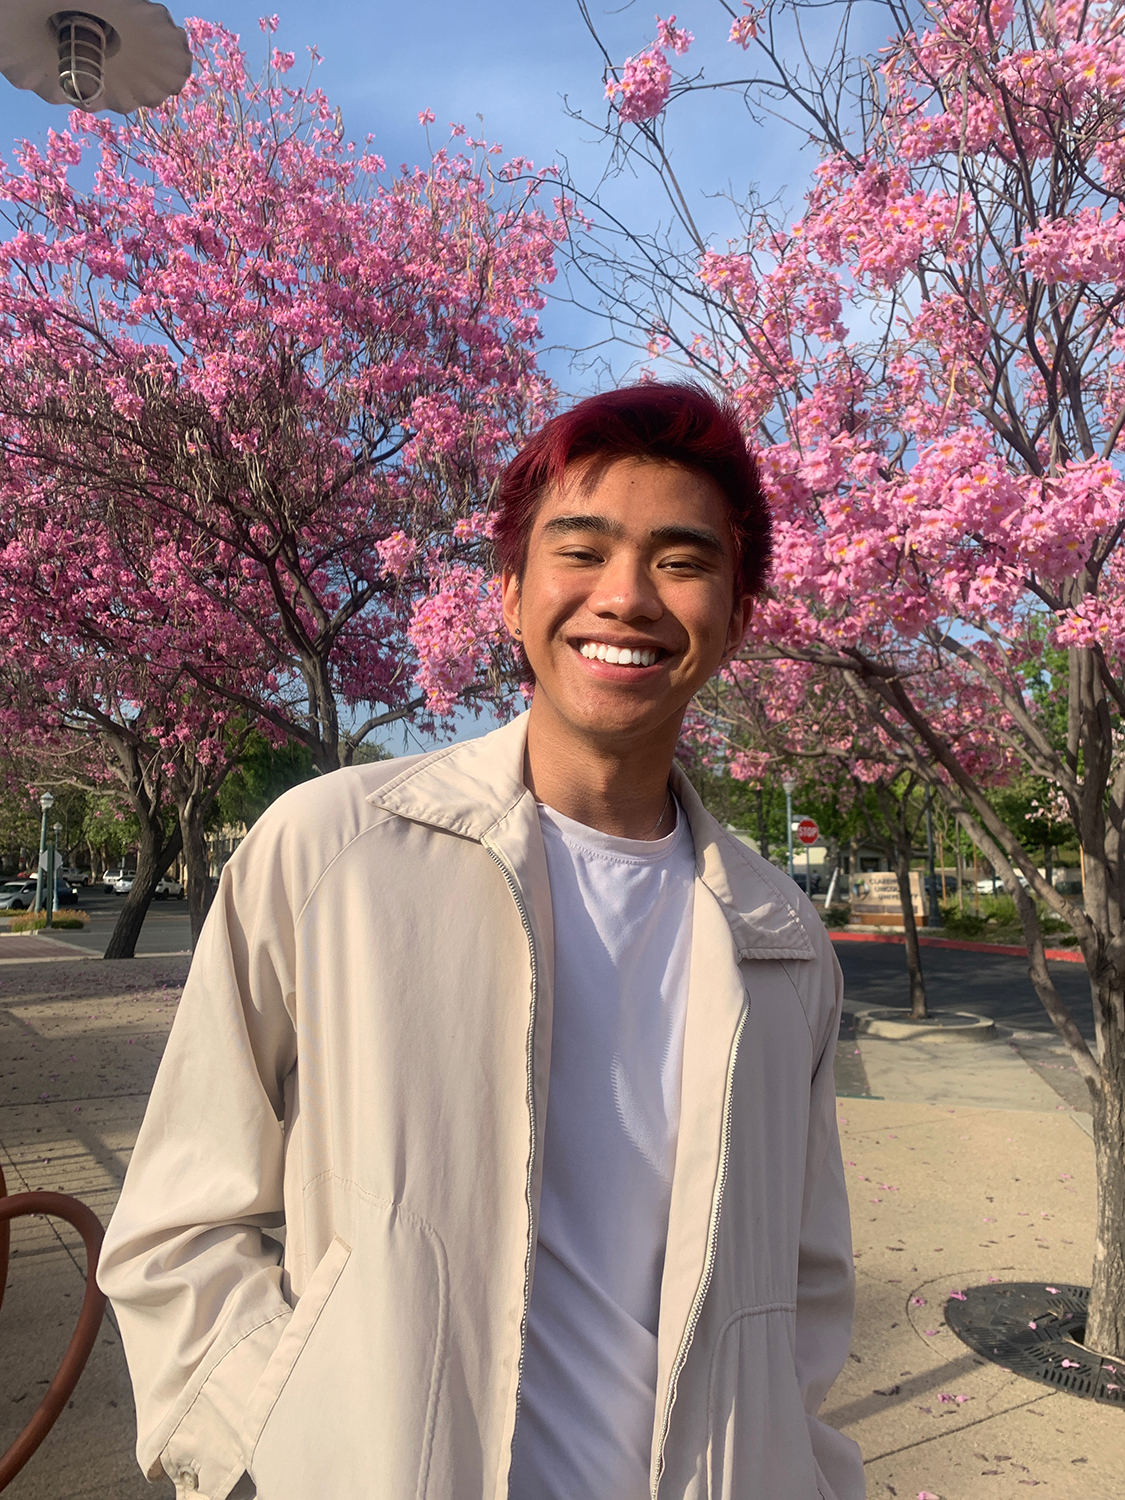 Jon Joey '23 stands smiling in front of blooming cherry blossom trees